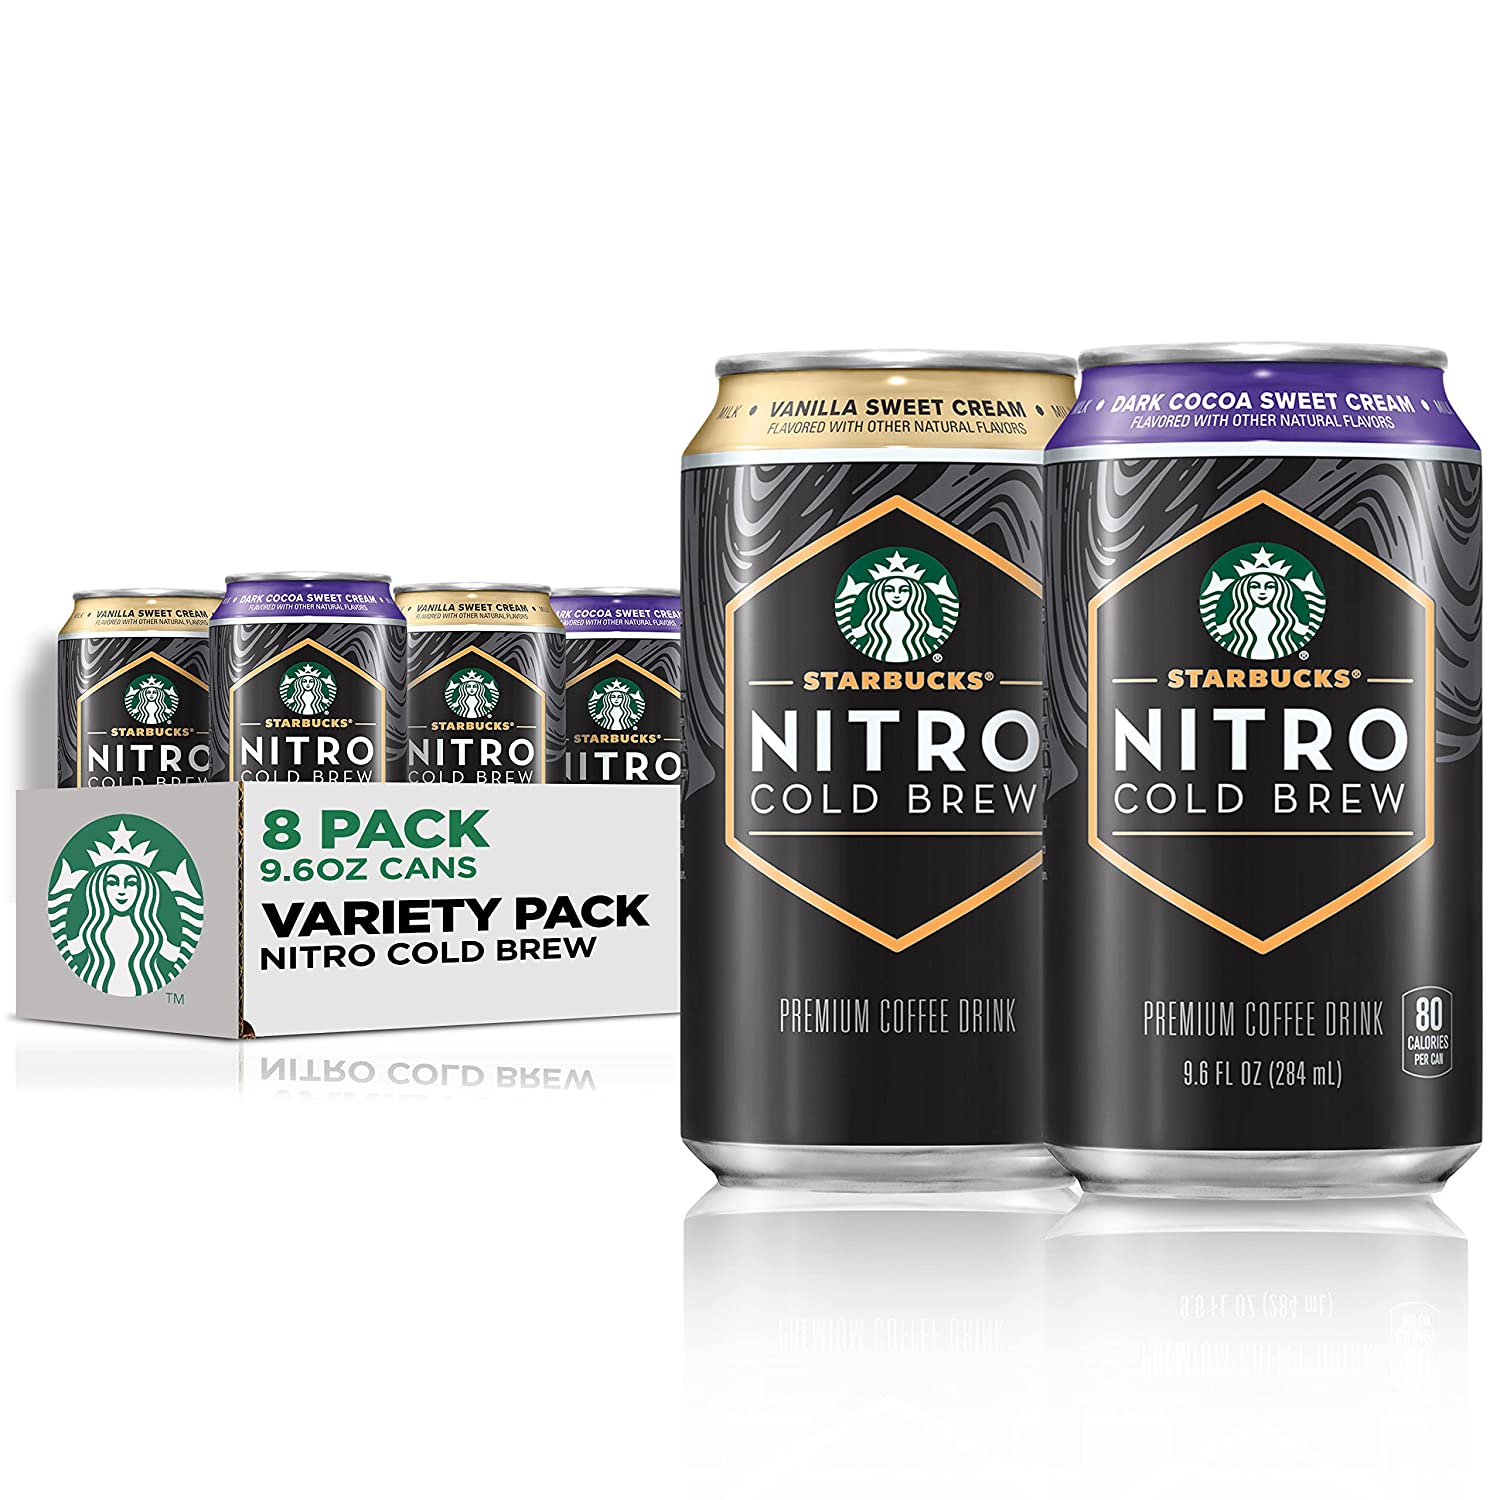 Хå  Х˥饹ȥ꡼ ҡ ե284ml4 顼ȥ꡼ࡡե284ml4Starbucks Nitro Cold Brew, 2 Flavor Sweet Cream Variety Pack, 9.6 fl oz Cans...